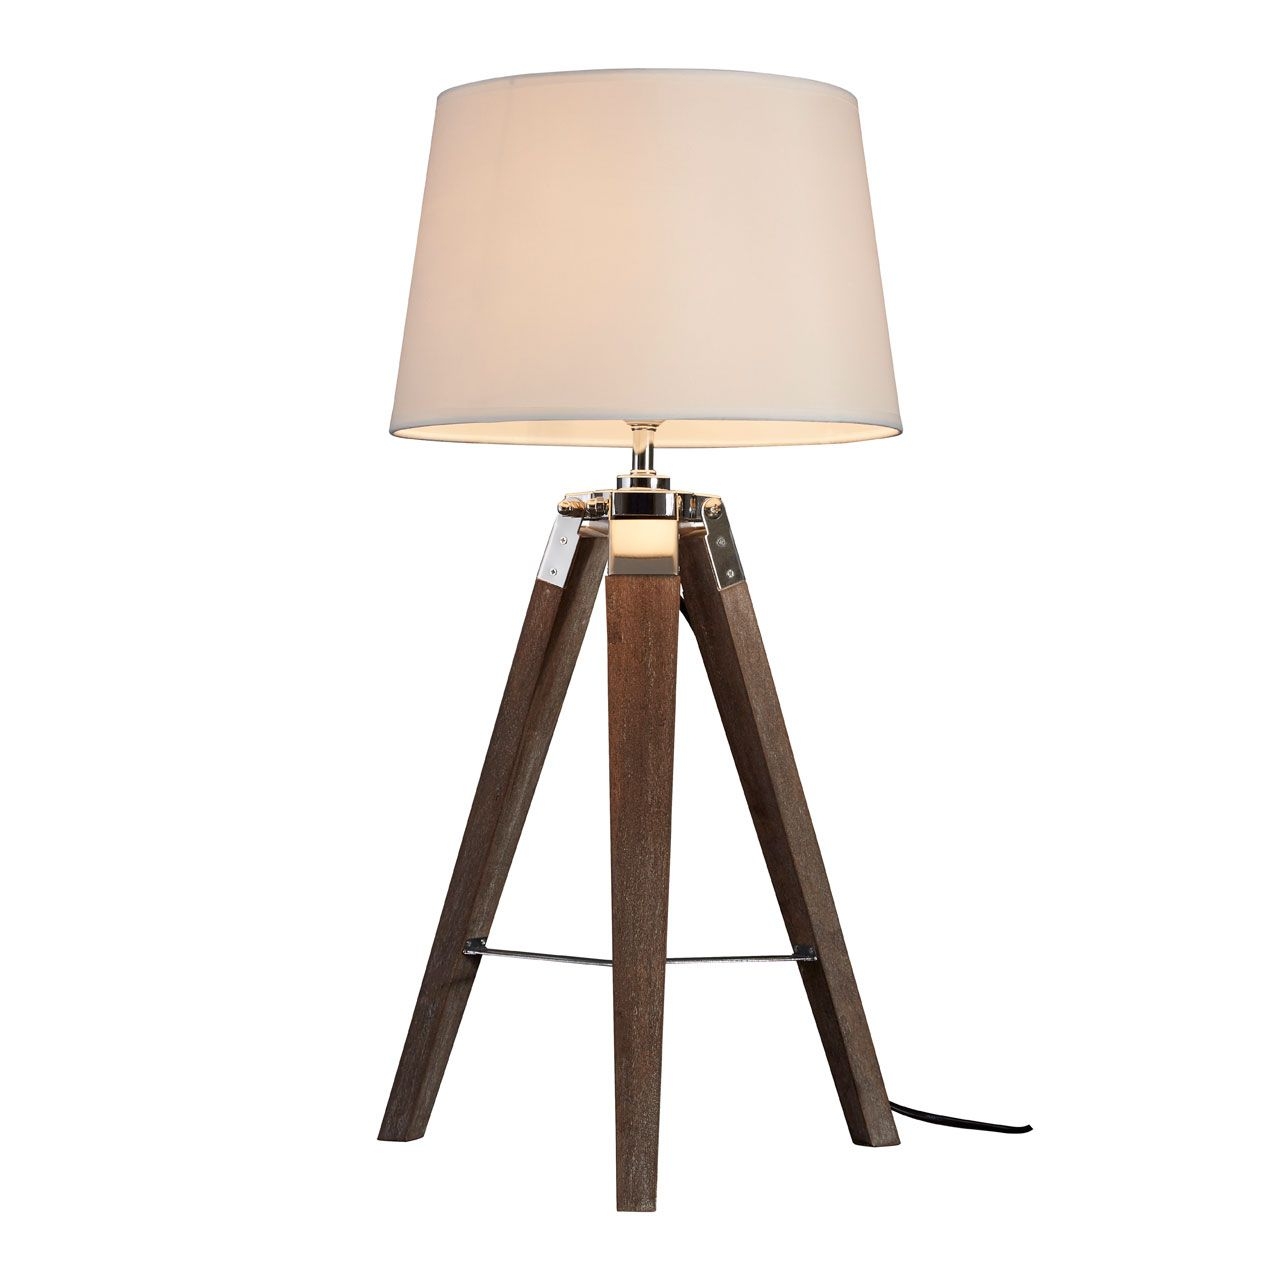 Bailey Cream Fabric Shade Table Lamp With Brown Wooden Tripod Base